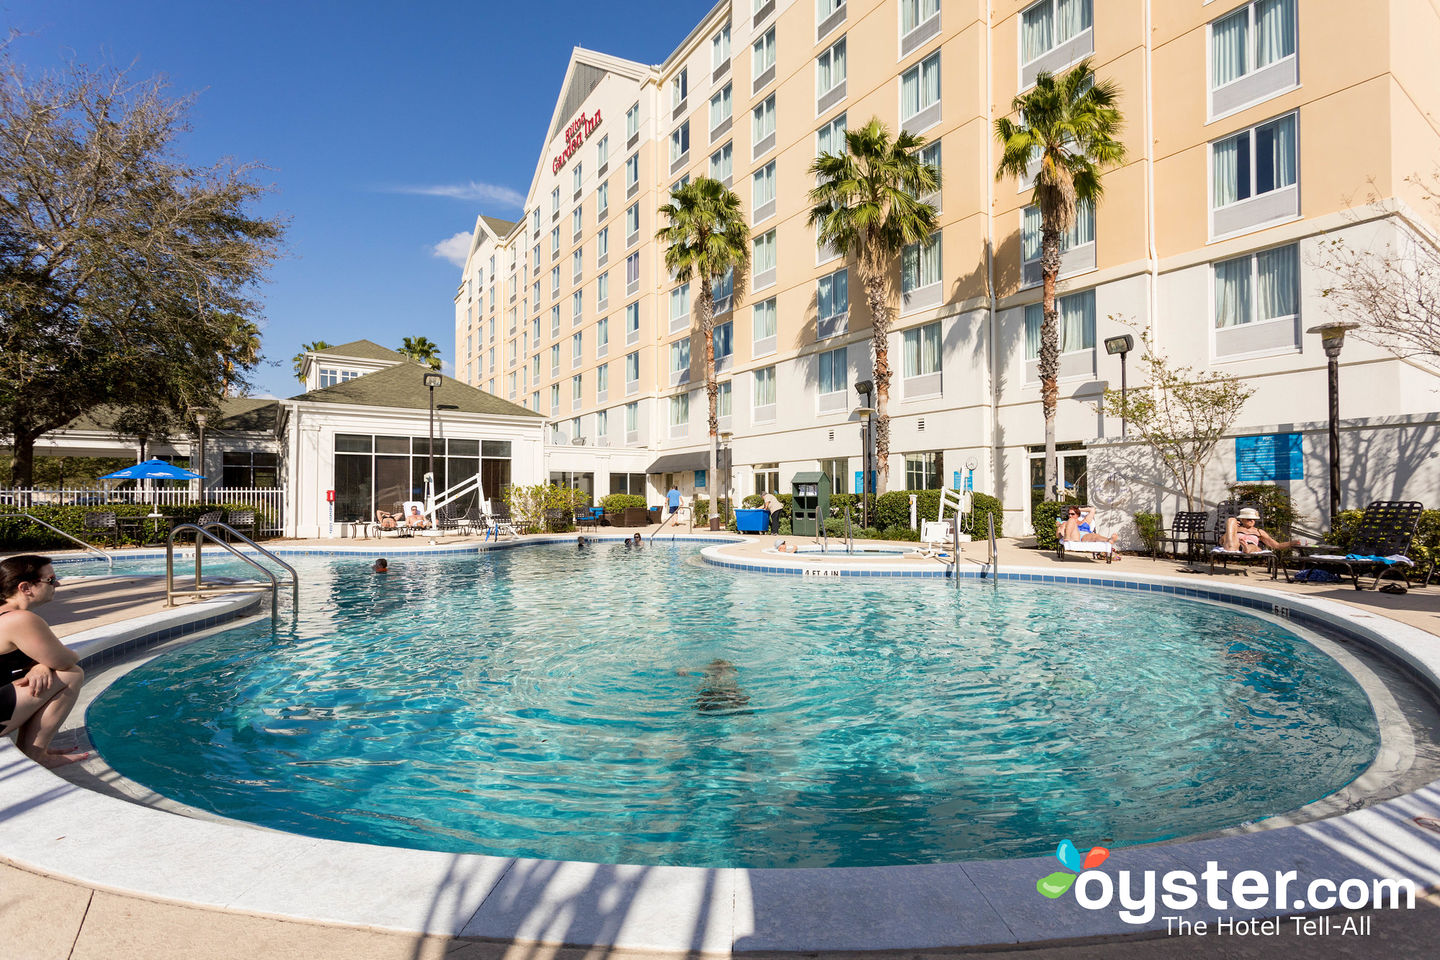 Hilton Garden Inn Orlando At Seaworld Review What To Really Expect If You Stay